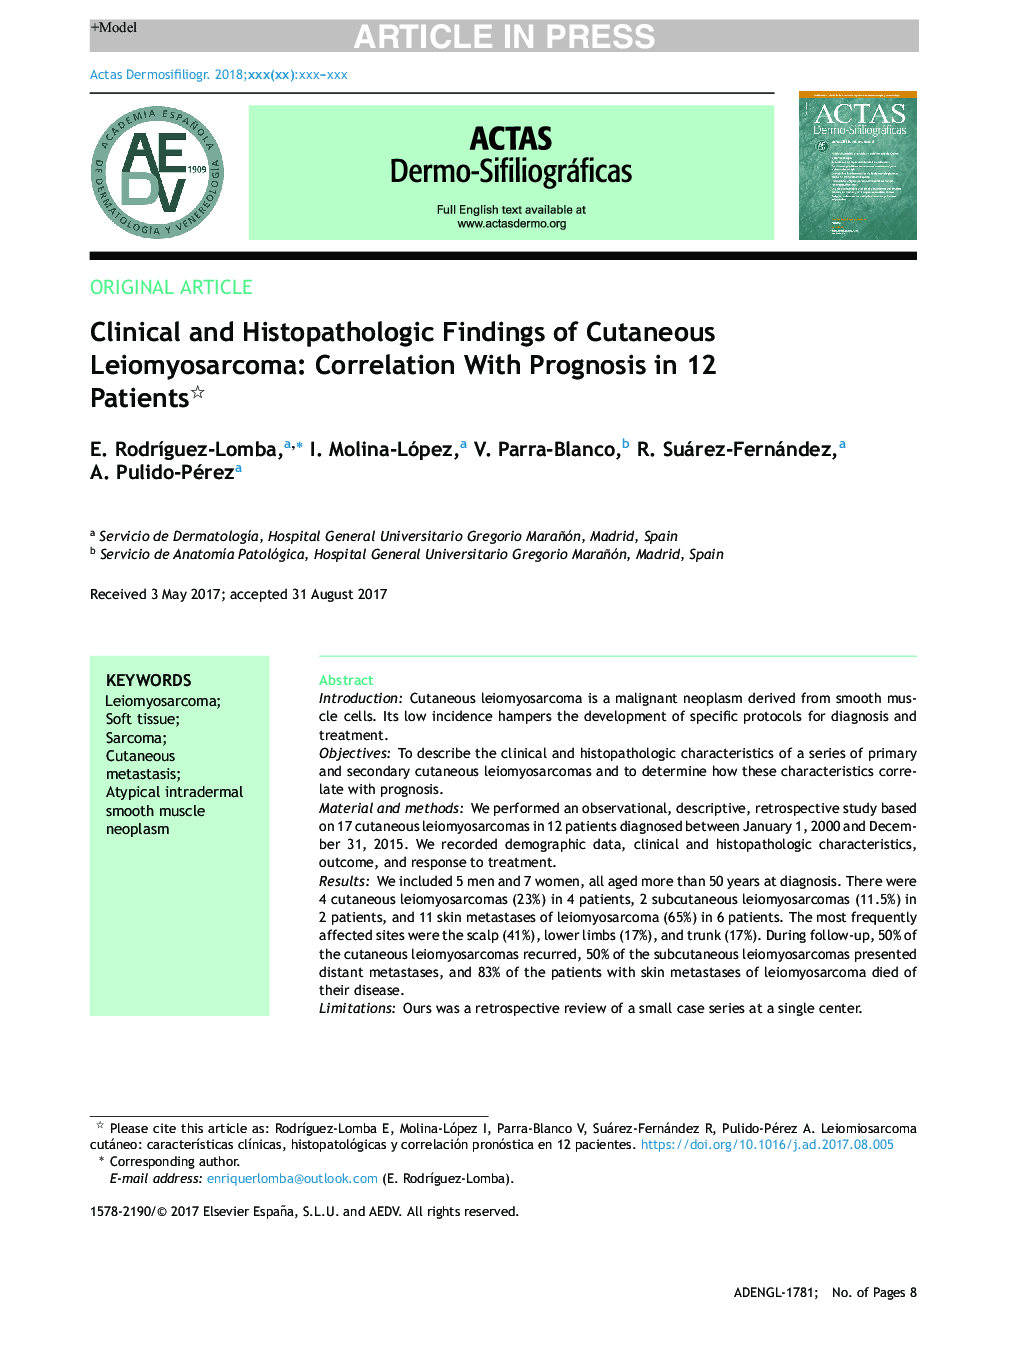 Clinical and Histopathologic Findings of Cutaneous Leiomyosarcoma: Correlation With Prognosis in 12 Patients